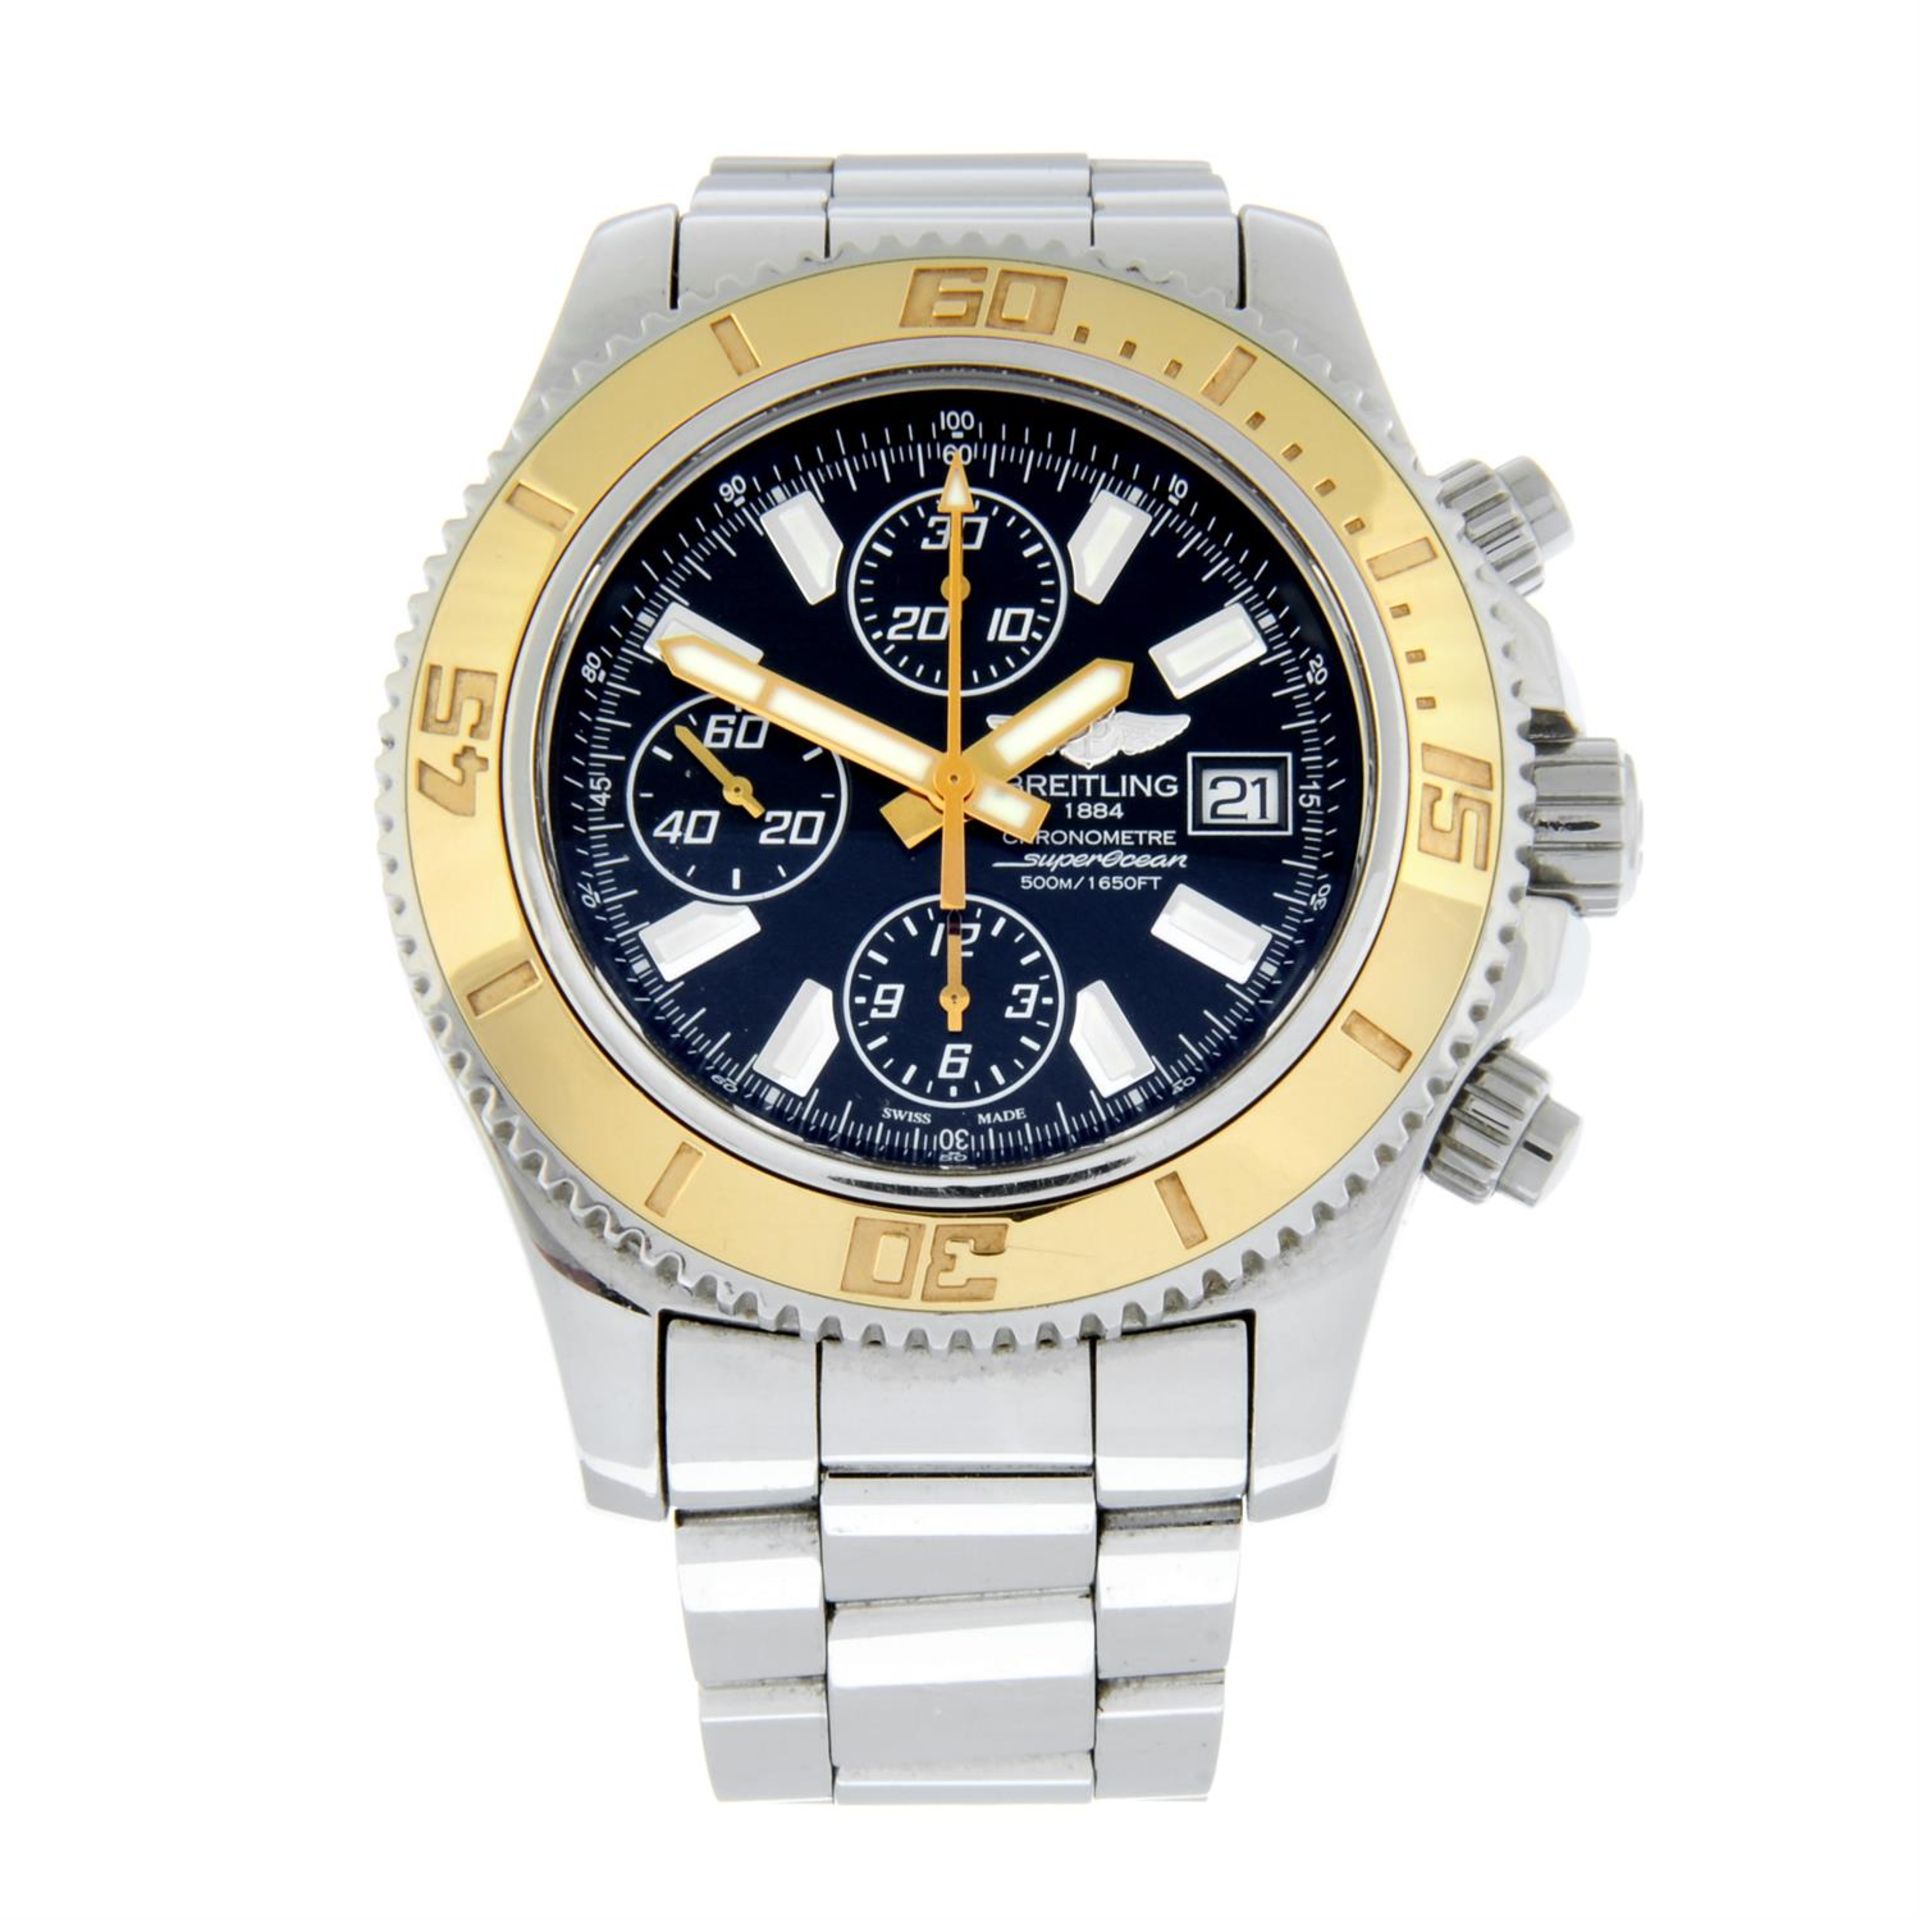 Breitling - a SuperOcean chronograph watch, 44mm.